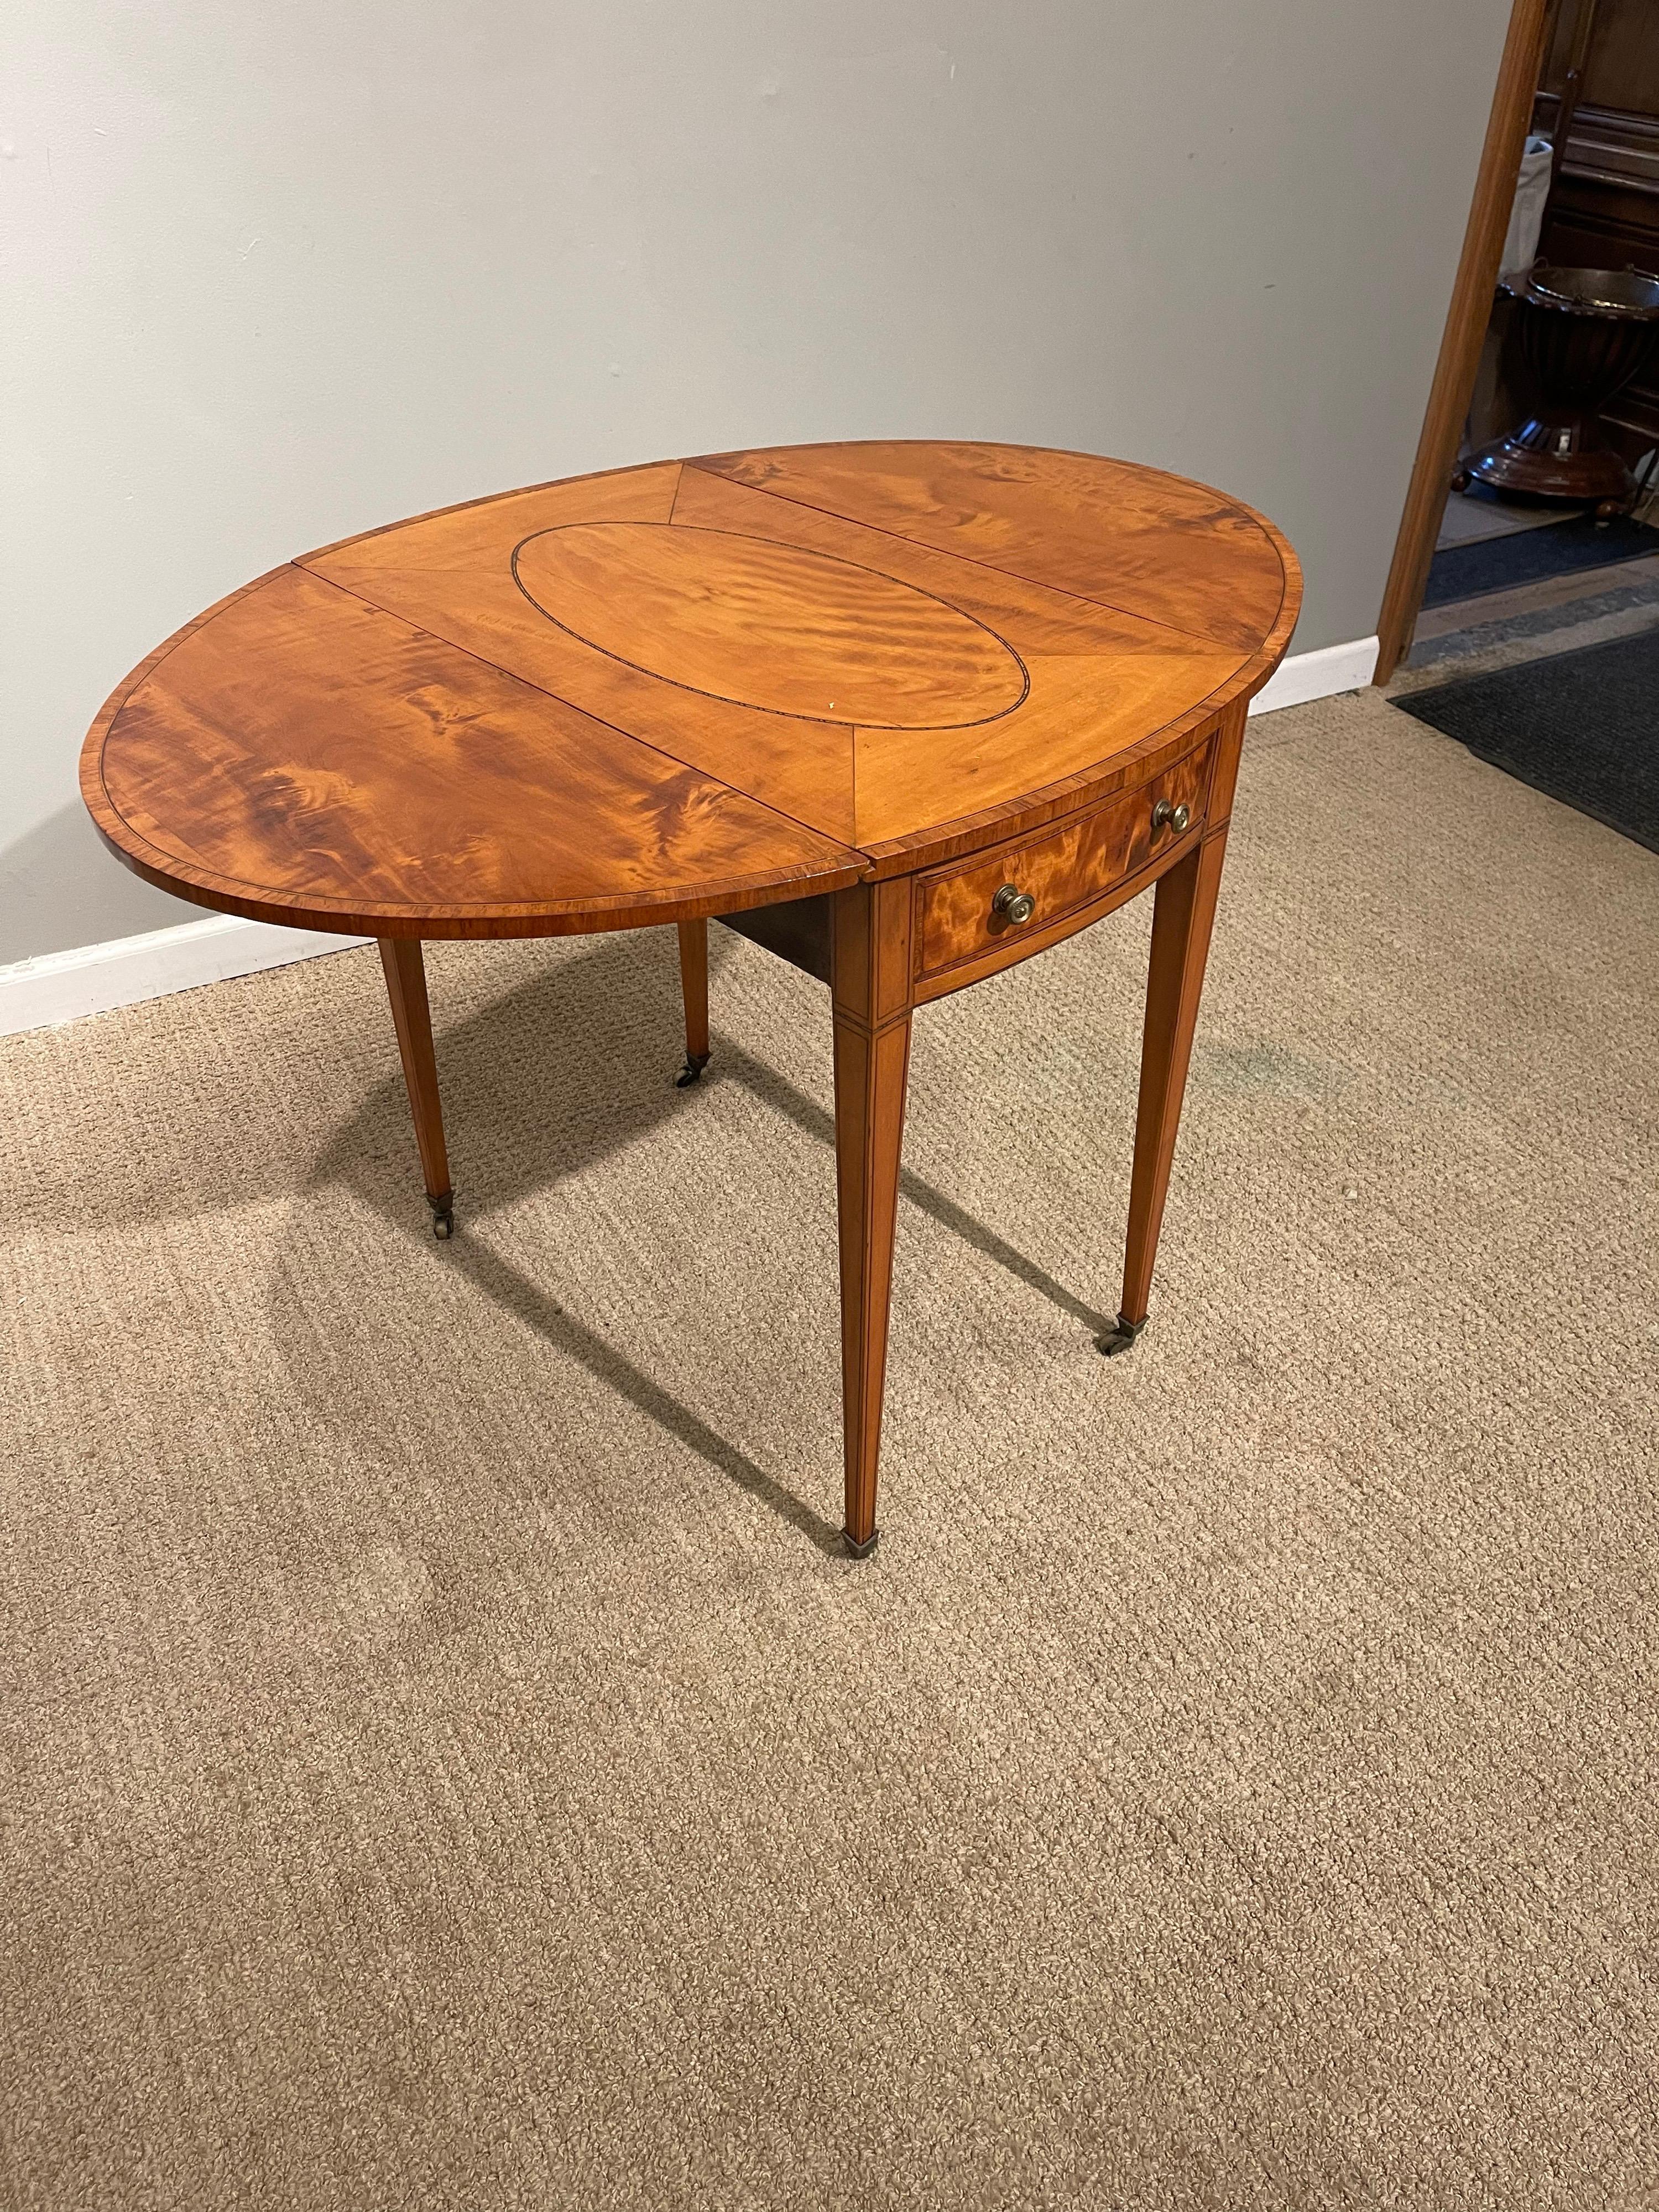 Highly figured oval Sheraton satinwood Pembroke table
having oval medallion in top crossbanded with satinwood &
having ebony stringing. Raised on square tapering legs on
brass castors & brass knobs
provenance; Malcolm Franklin, Inc.